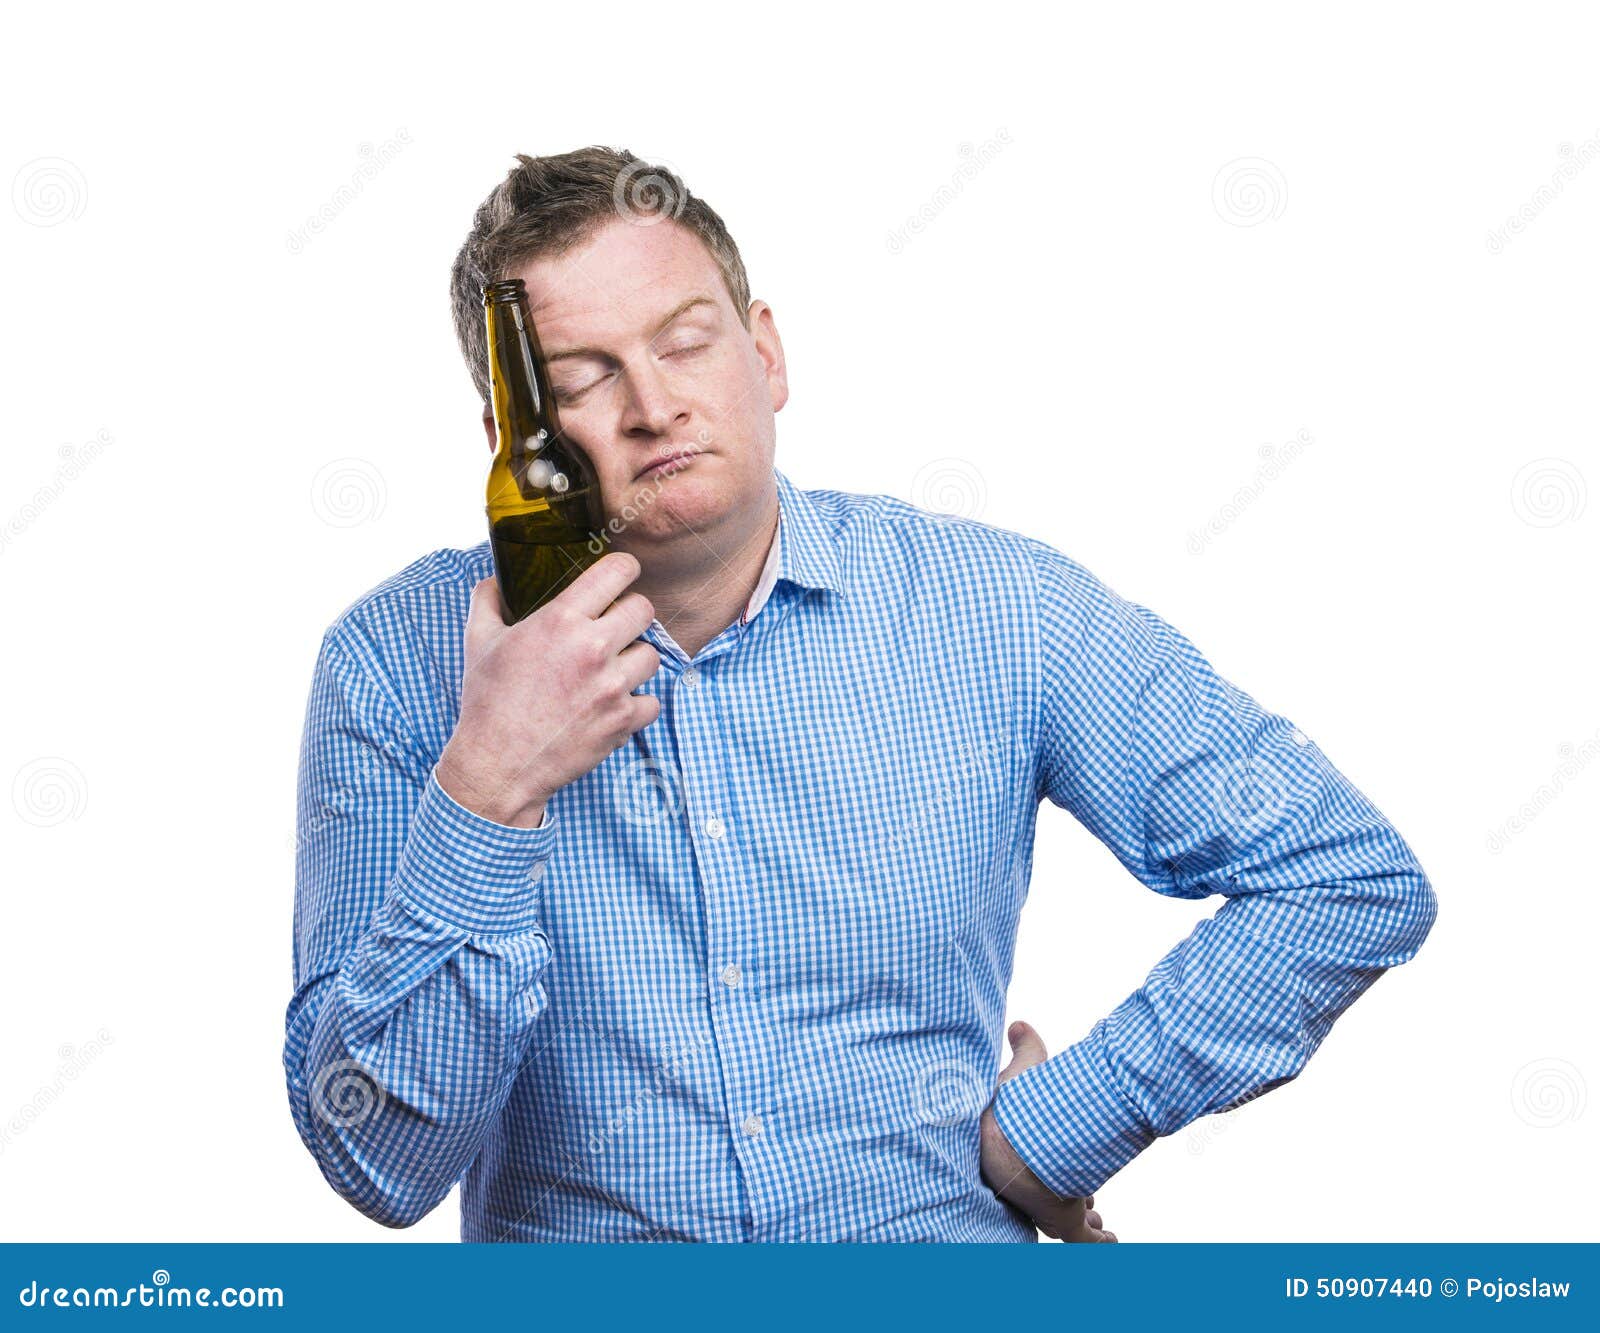 Drunk young man stock photo. Image of isolated, depressed - 50907440